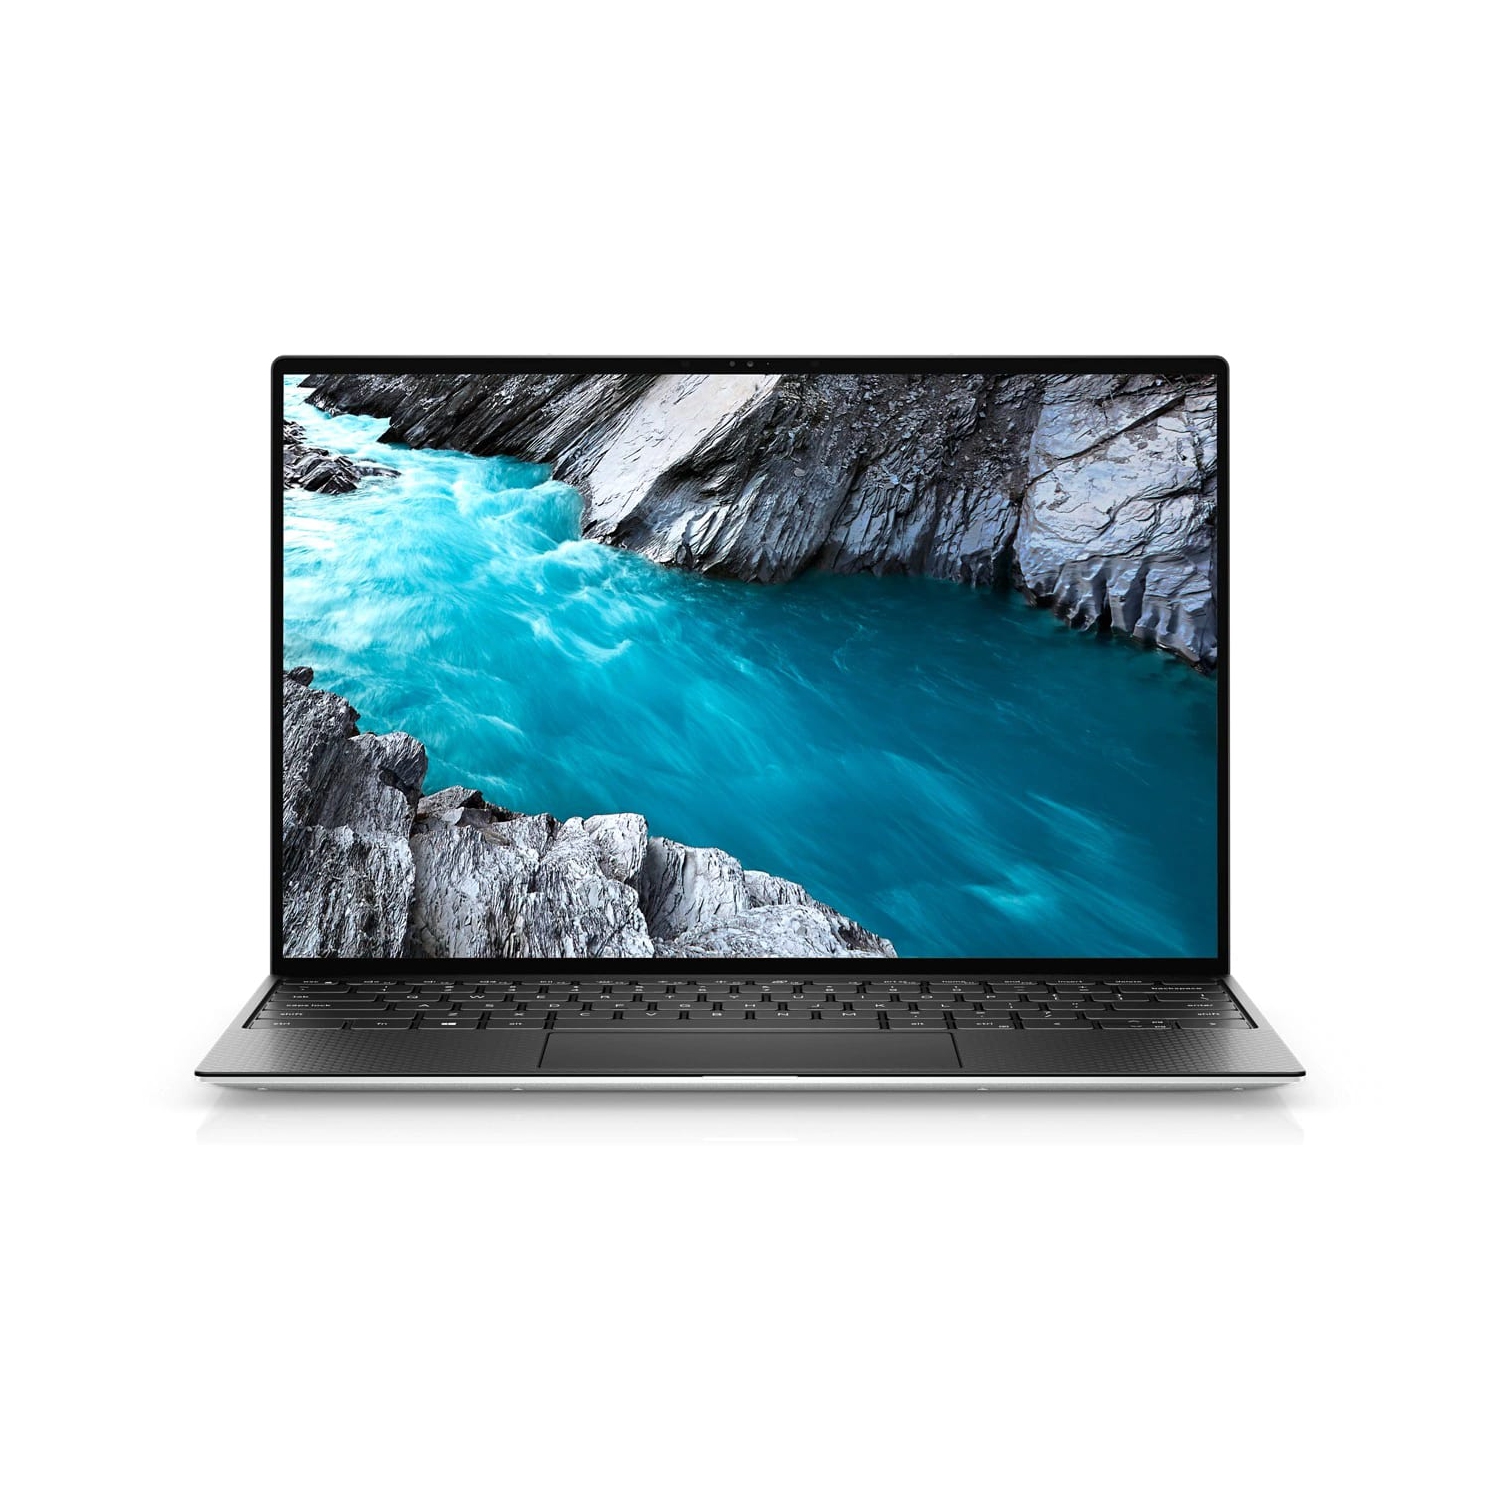 Refurbished (Excellent) - Dell XPS 13 9310 Laptop (2020) | 13.4" FHD+ | Core i7 - 1TB SSD - 32GB RAM | 4 Cores @ 4.7 GHz - 11th Gen CPU Certified Refurbished